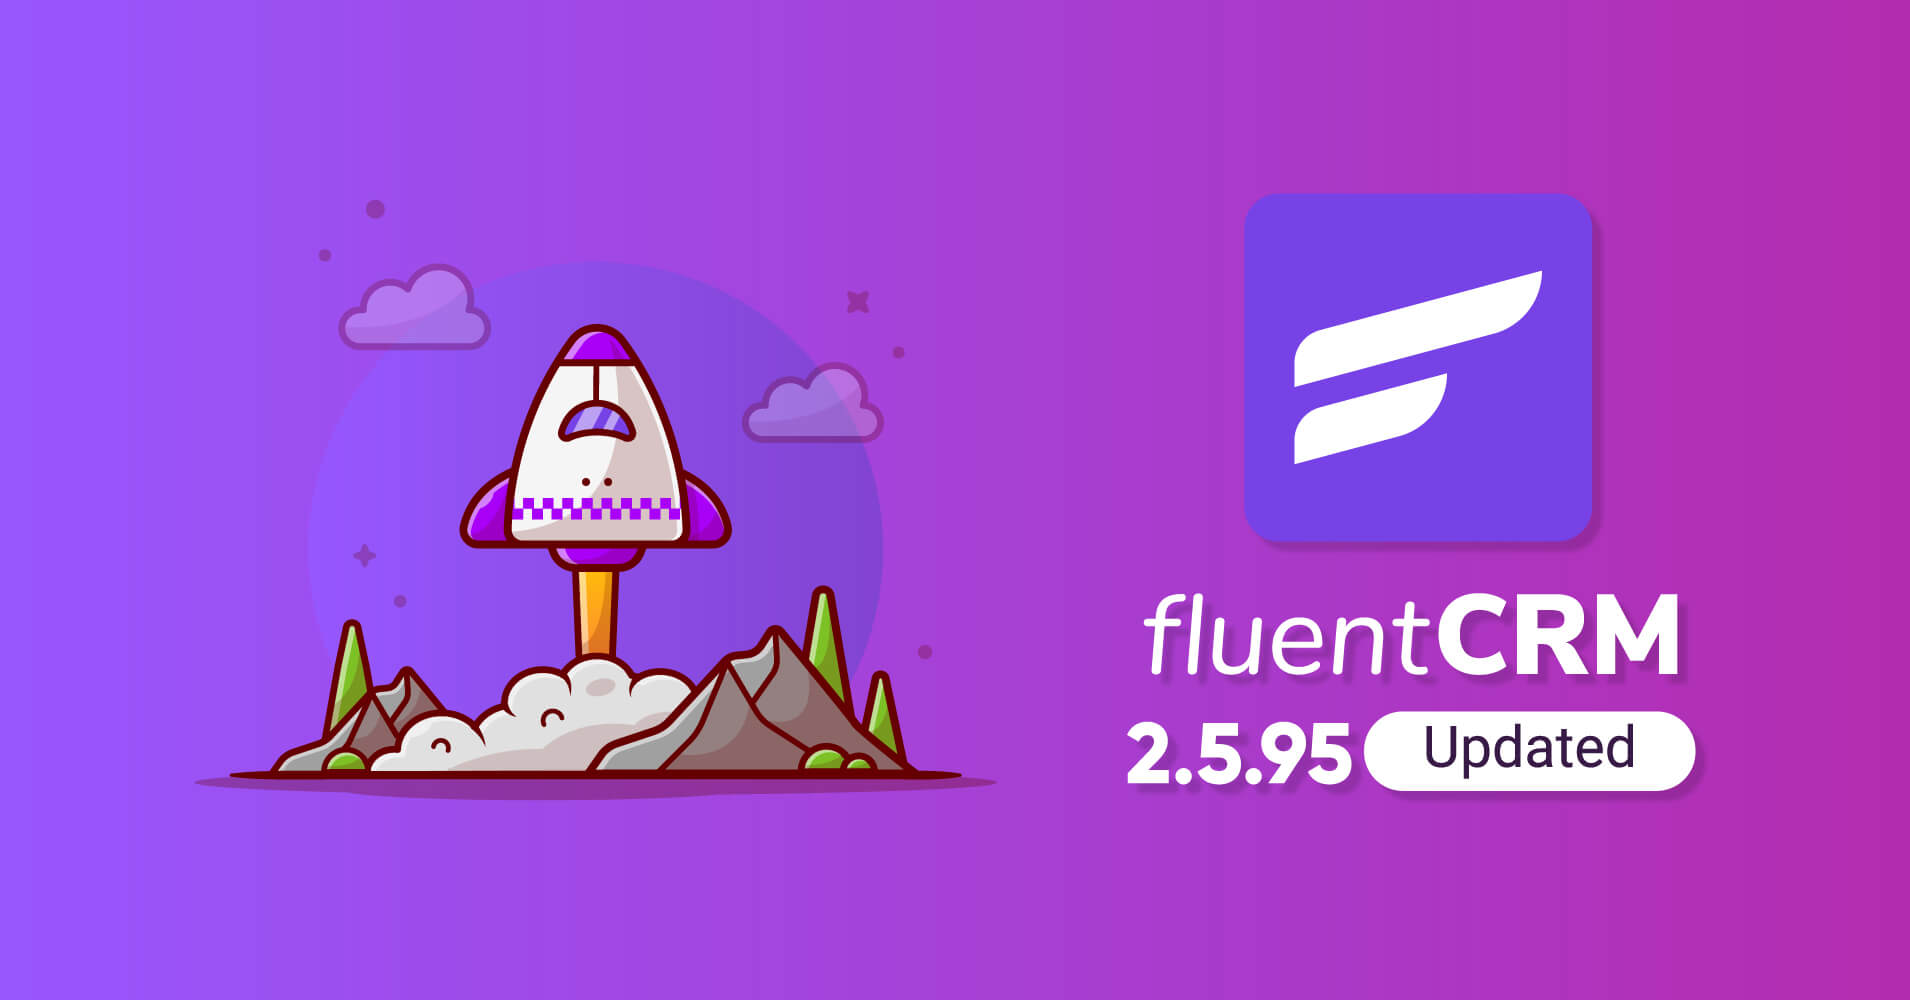 FluentCRM 2.5.95: New Features and Automation Improvements